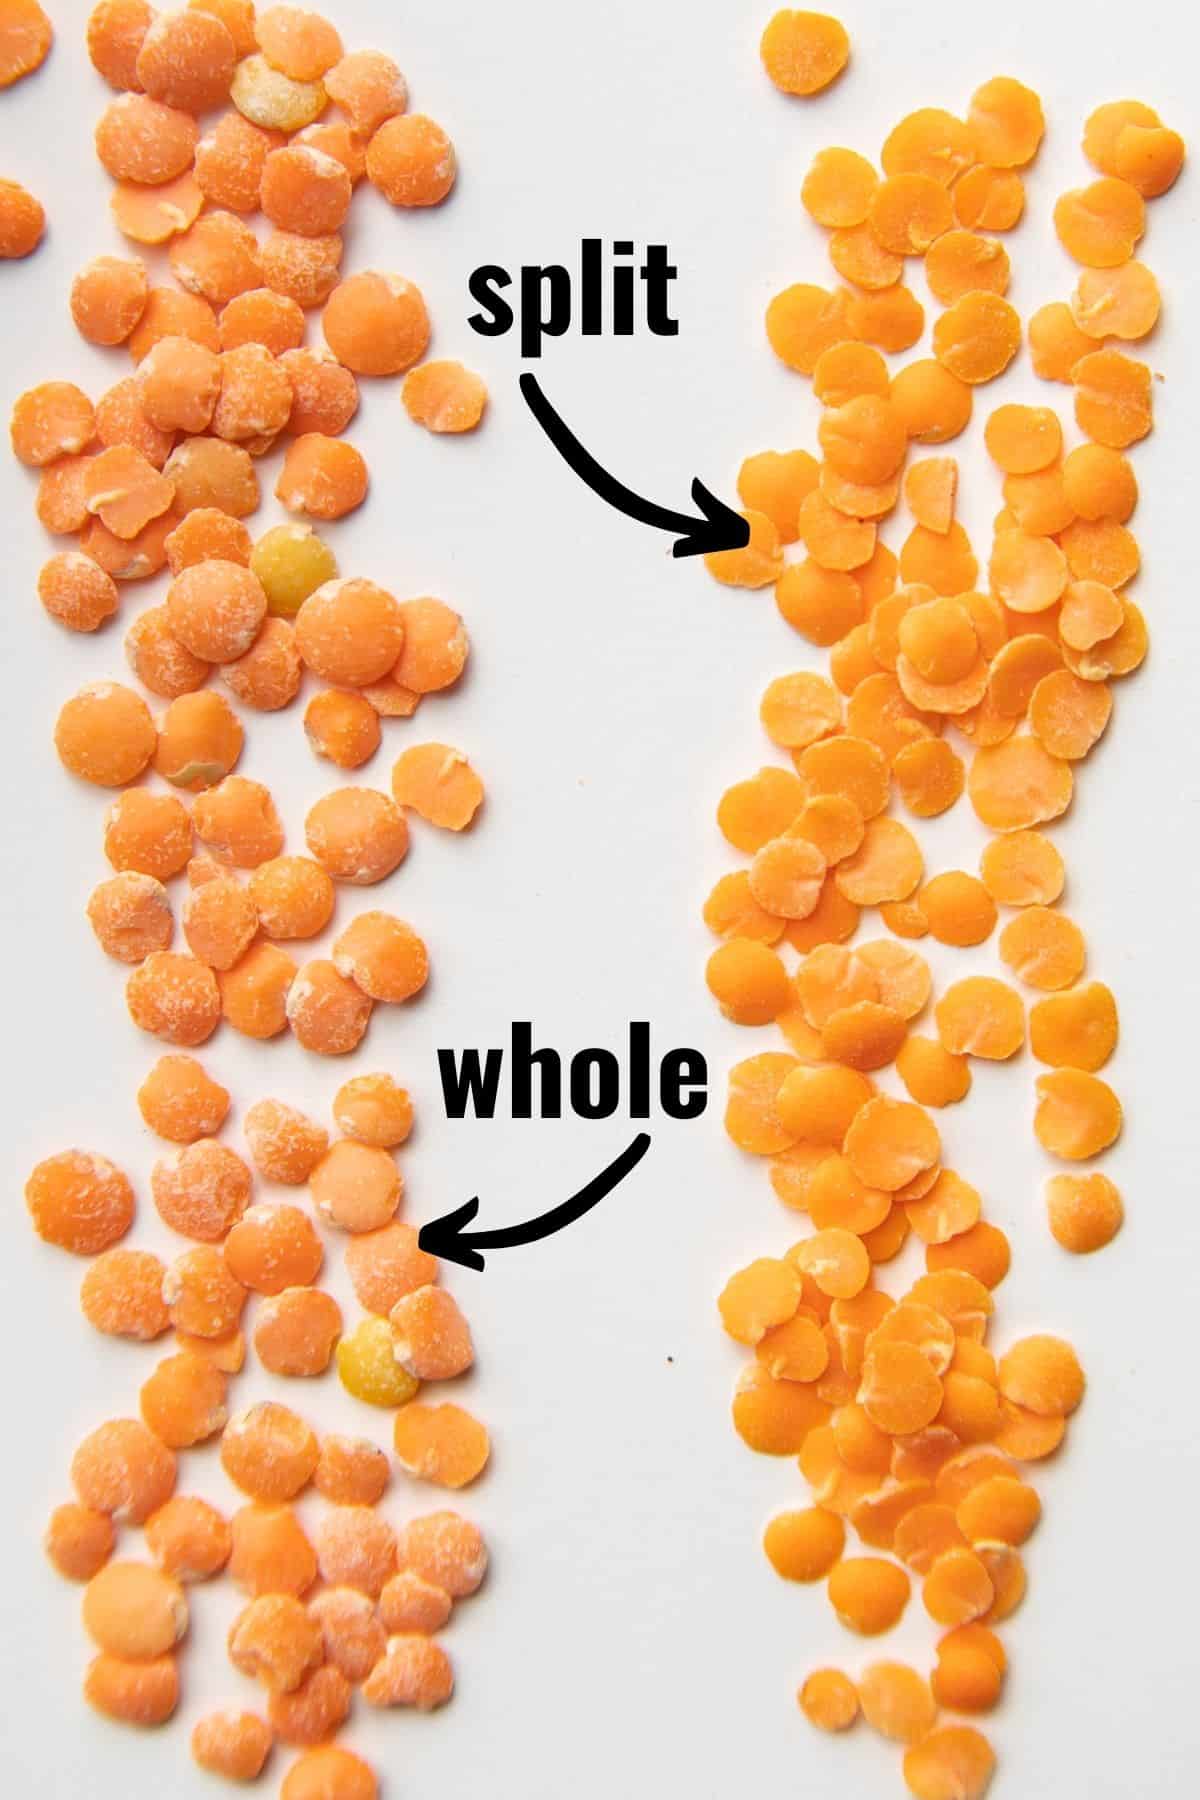 Graphic showing whole versus split red lentils on a white surface.